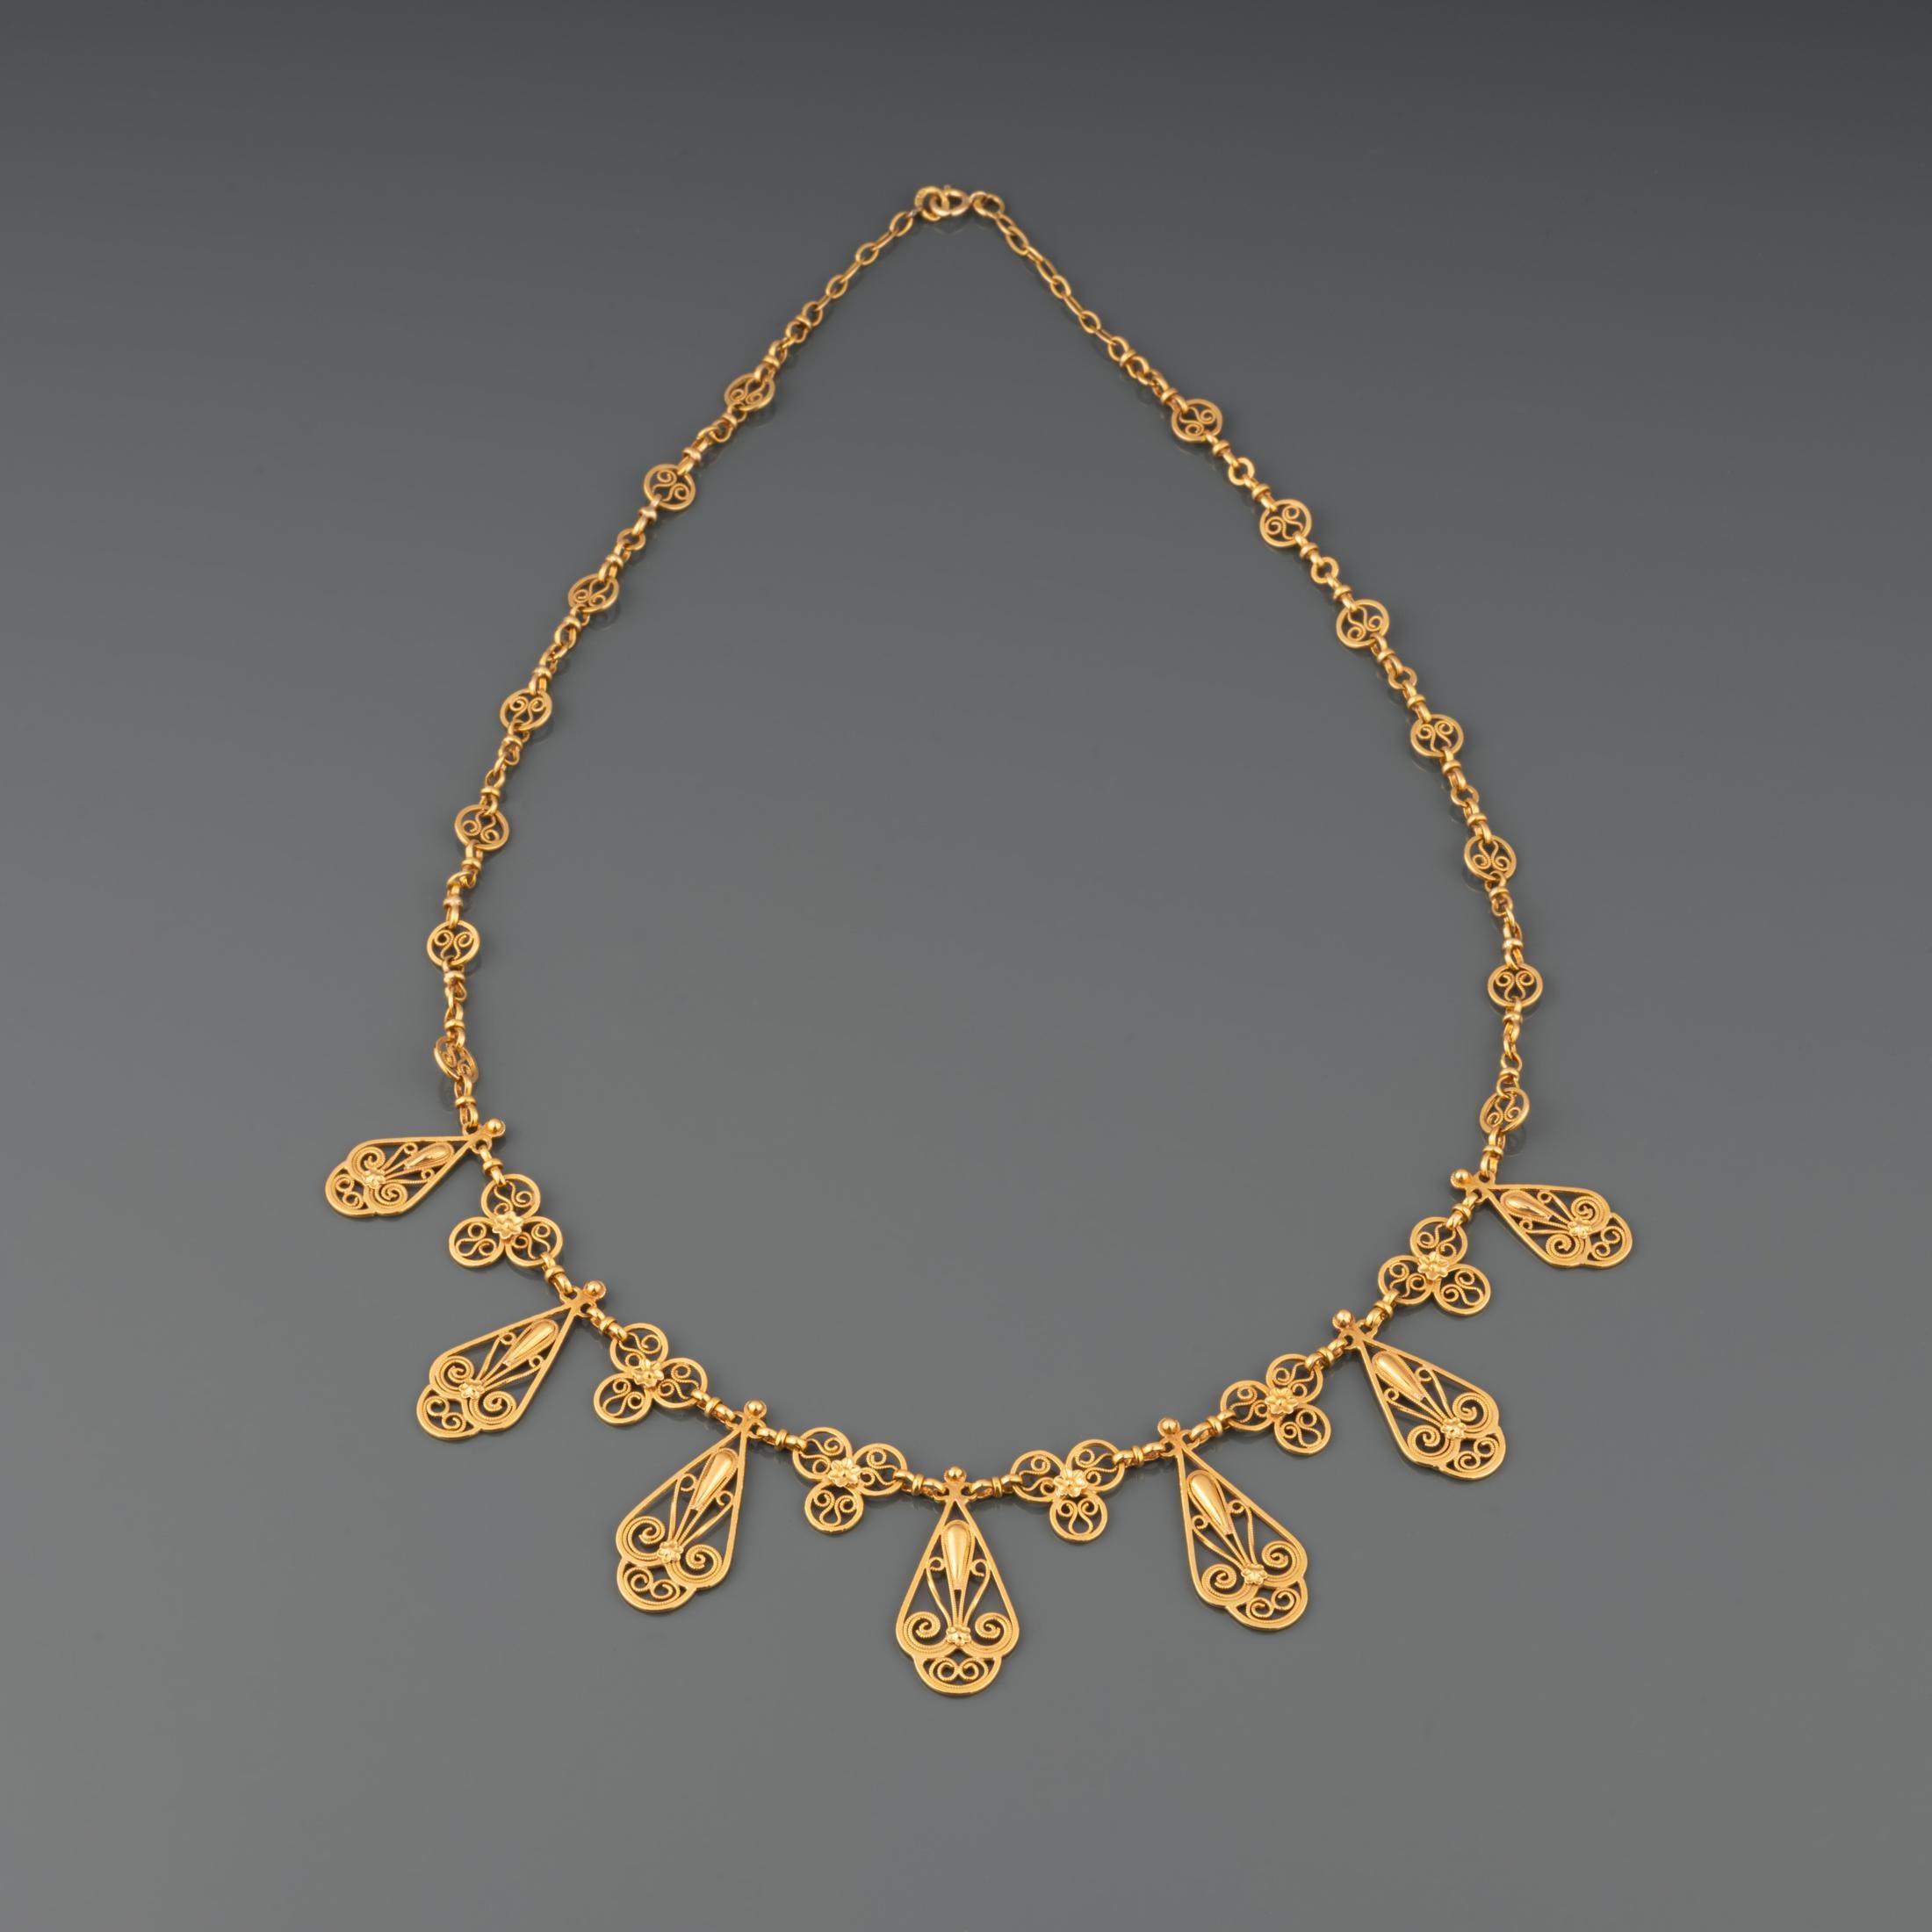 A very lovely antique necklace, made in France circa 1880.

Made in yellow gold 18k, multiple hallmarks (eagle heads).

The length is 47cm. The height of central pendants is 28mm.

Weight is 20 grams.

